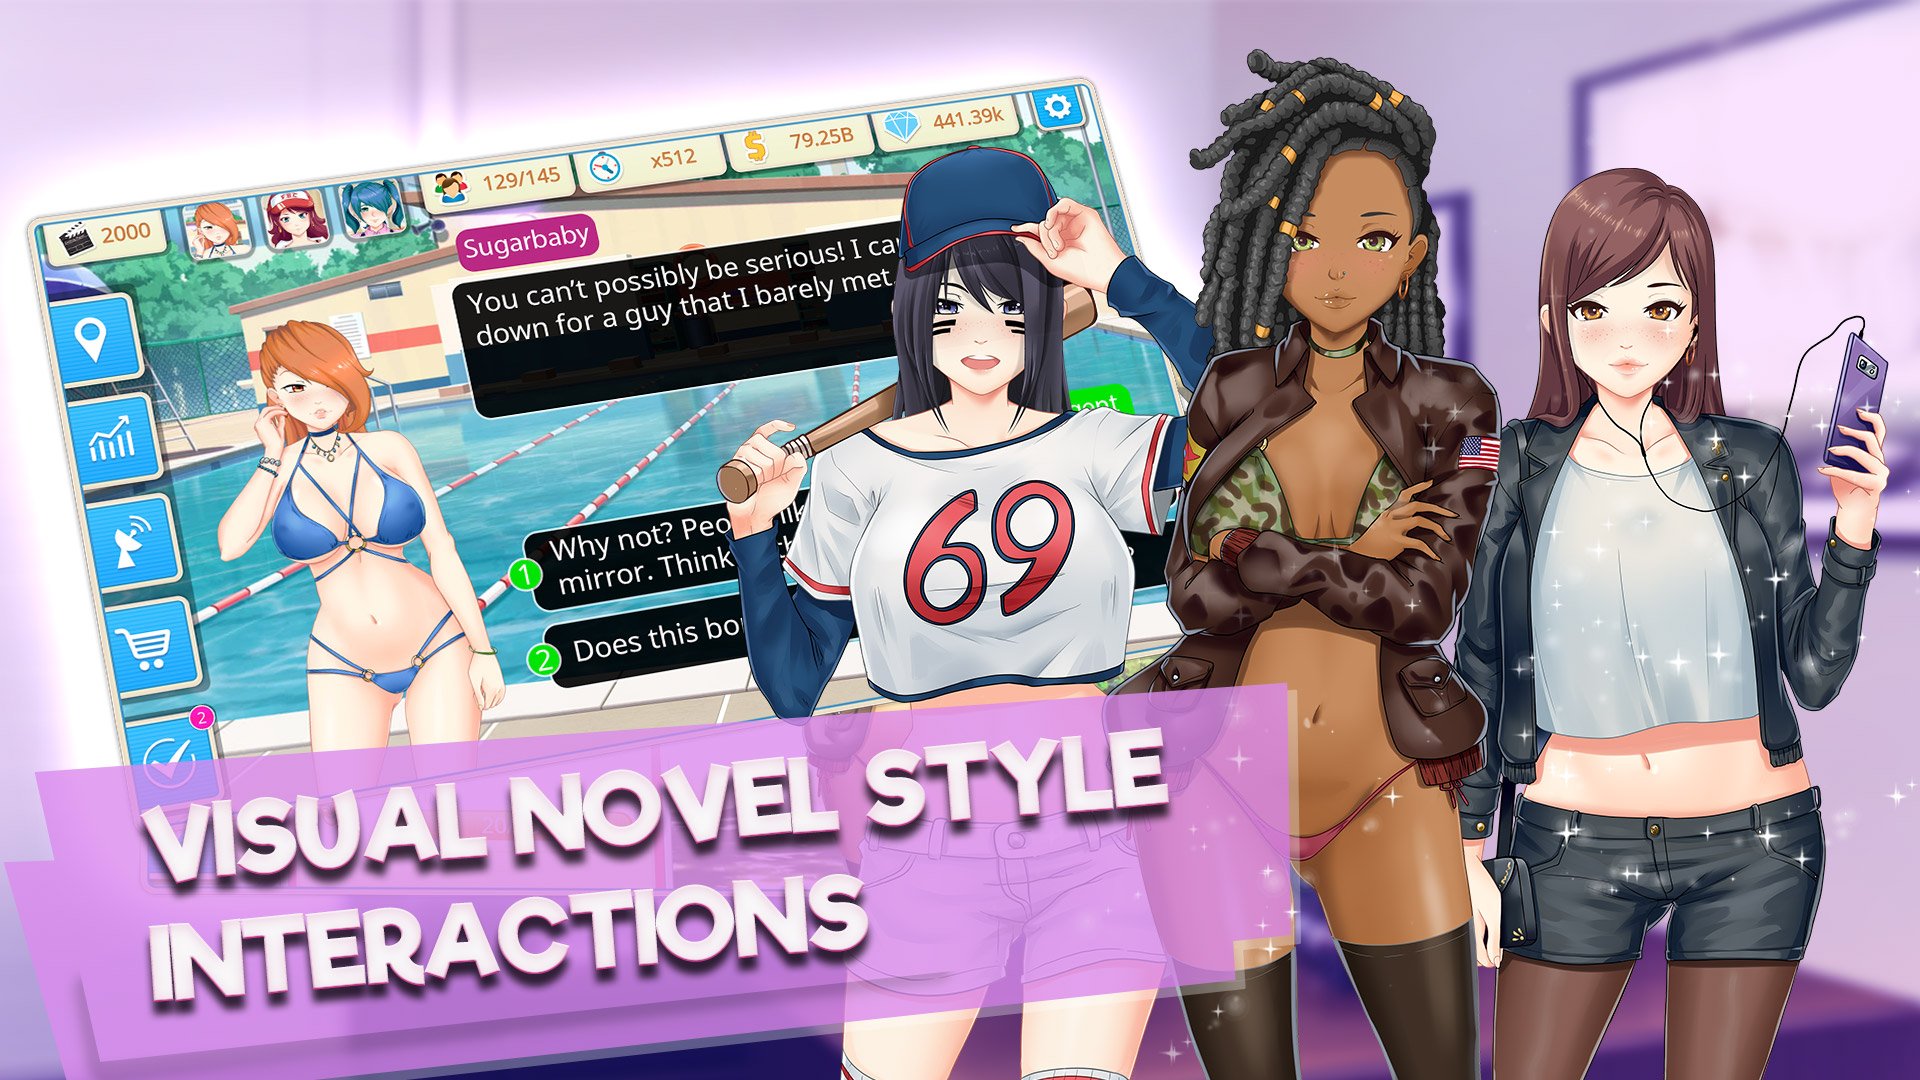 Play casual Game - Casting Agent on Nutaku. casual Game - Casting Agent. 